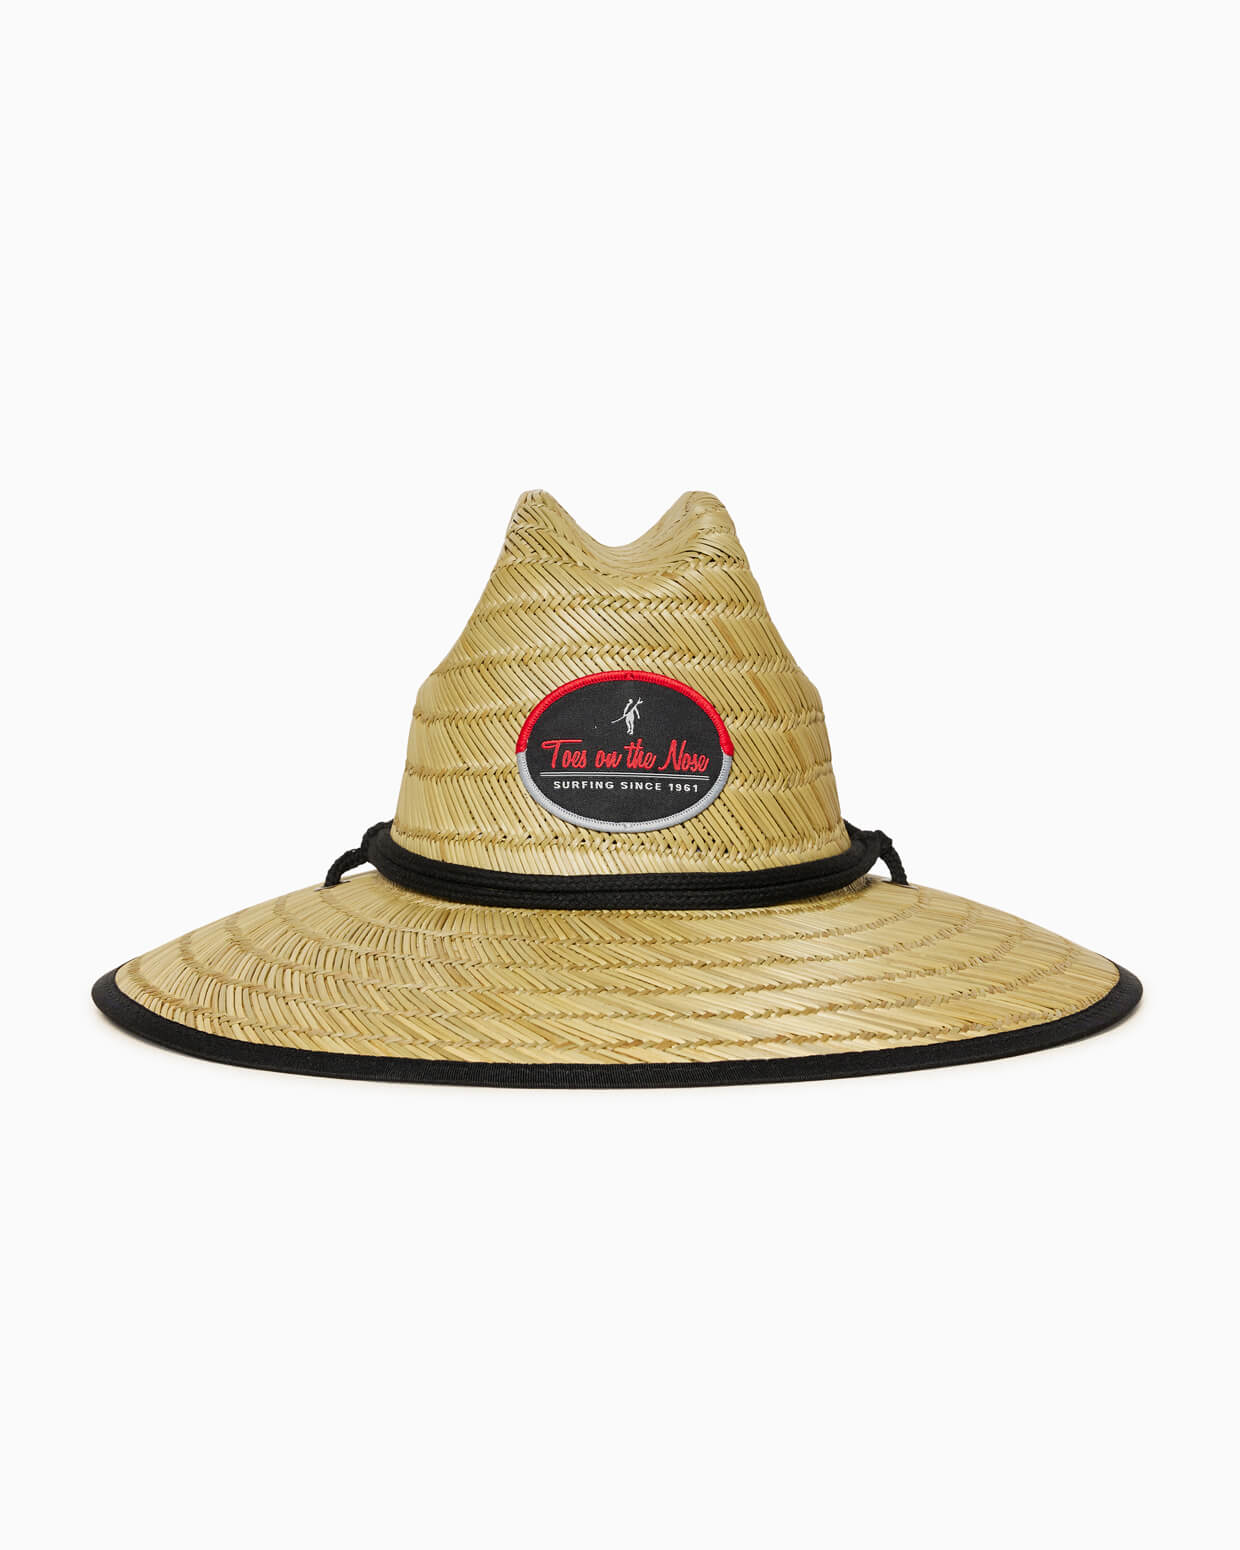 Toes On The Nose | Baja | Beach Hat OSFM / Heritage